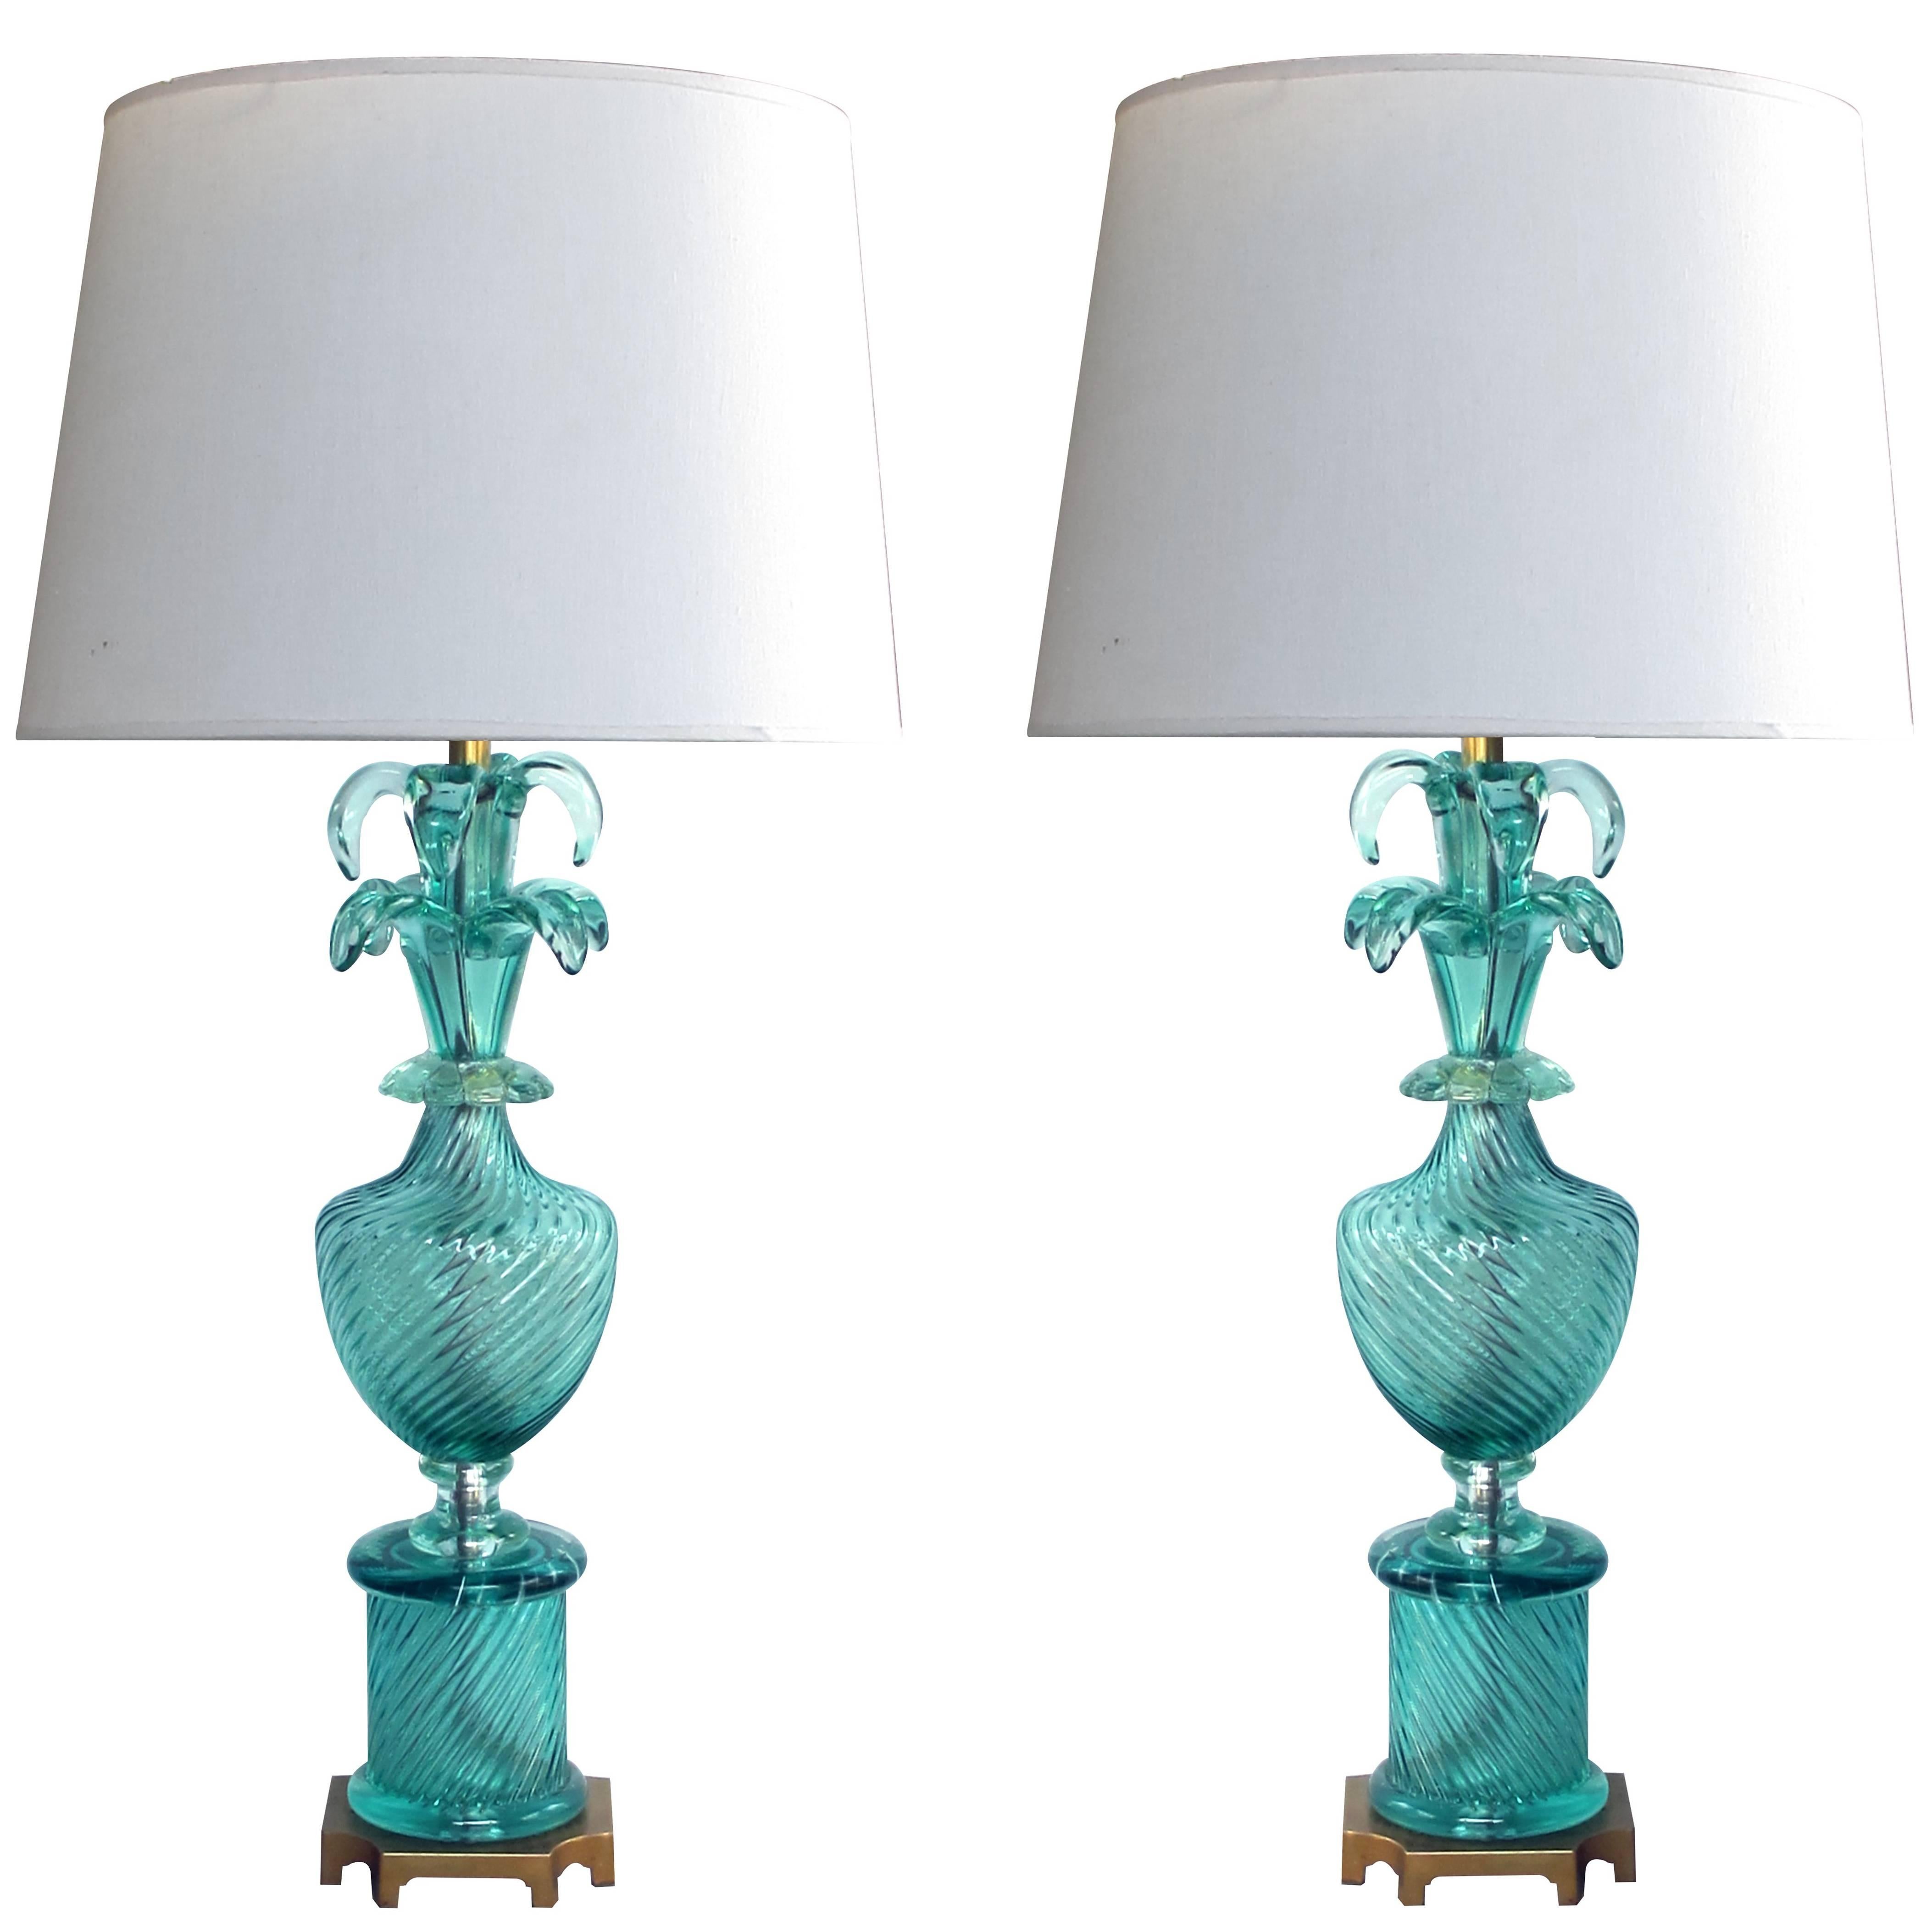 Stunning Pair of Murano 1960s Baluster-Form Aqua Glass Lamps by Marbro Lamp Co